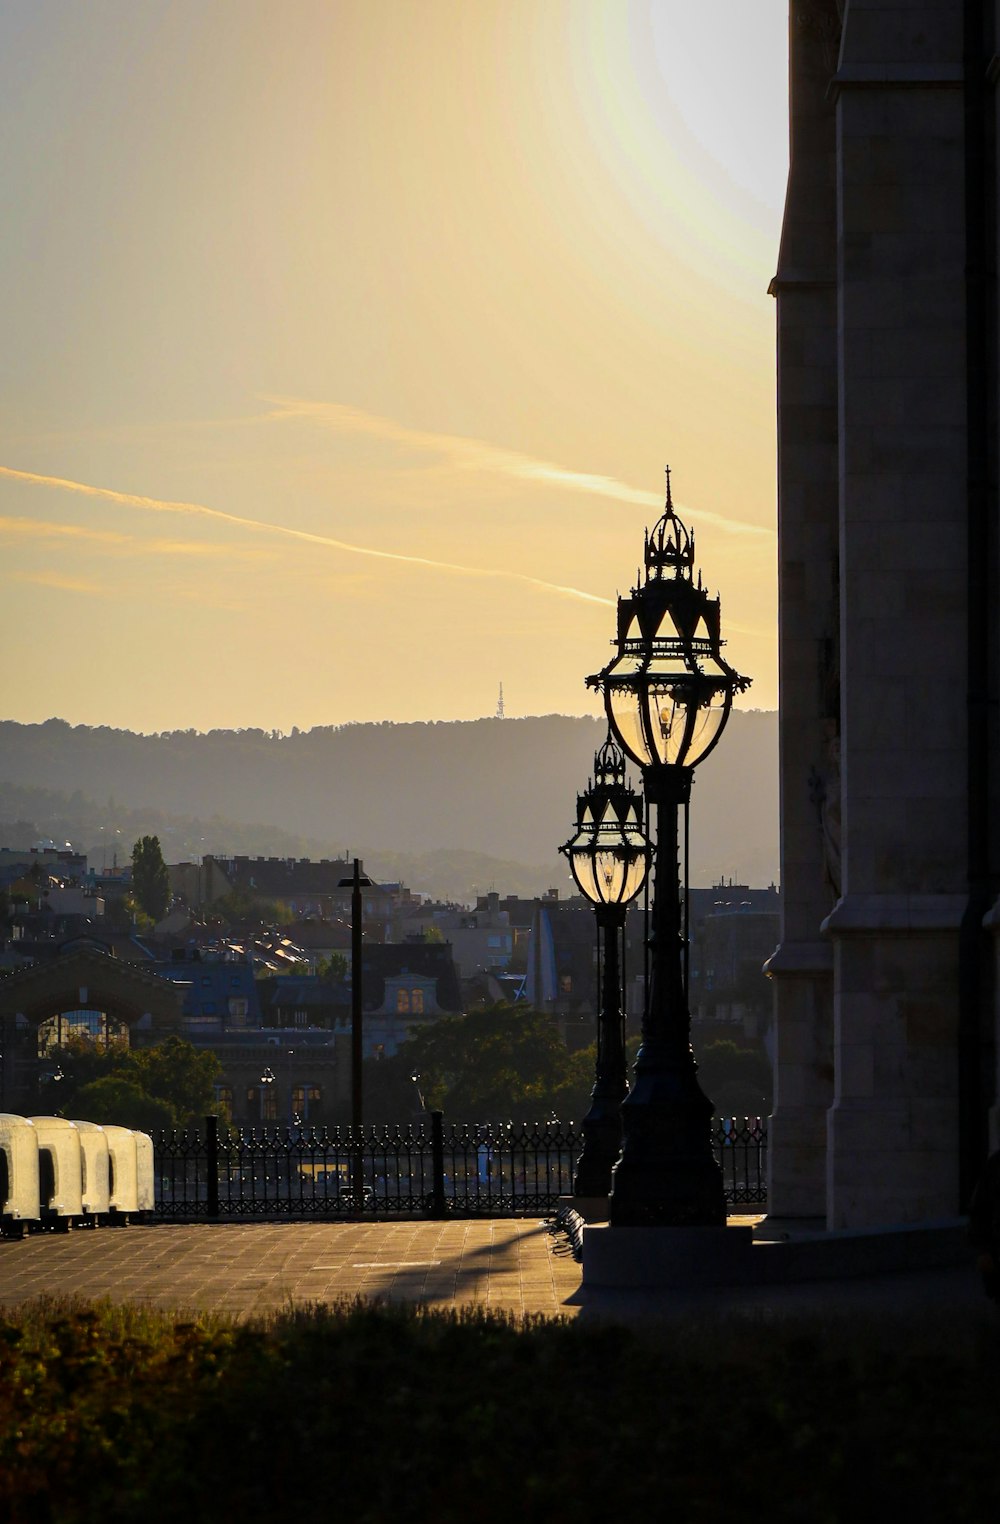 a lamp post with a city in the background